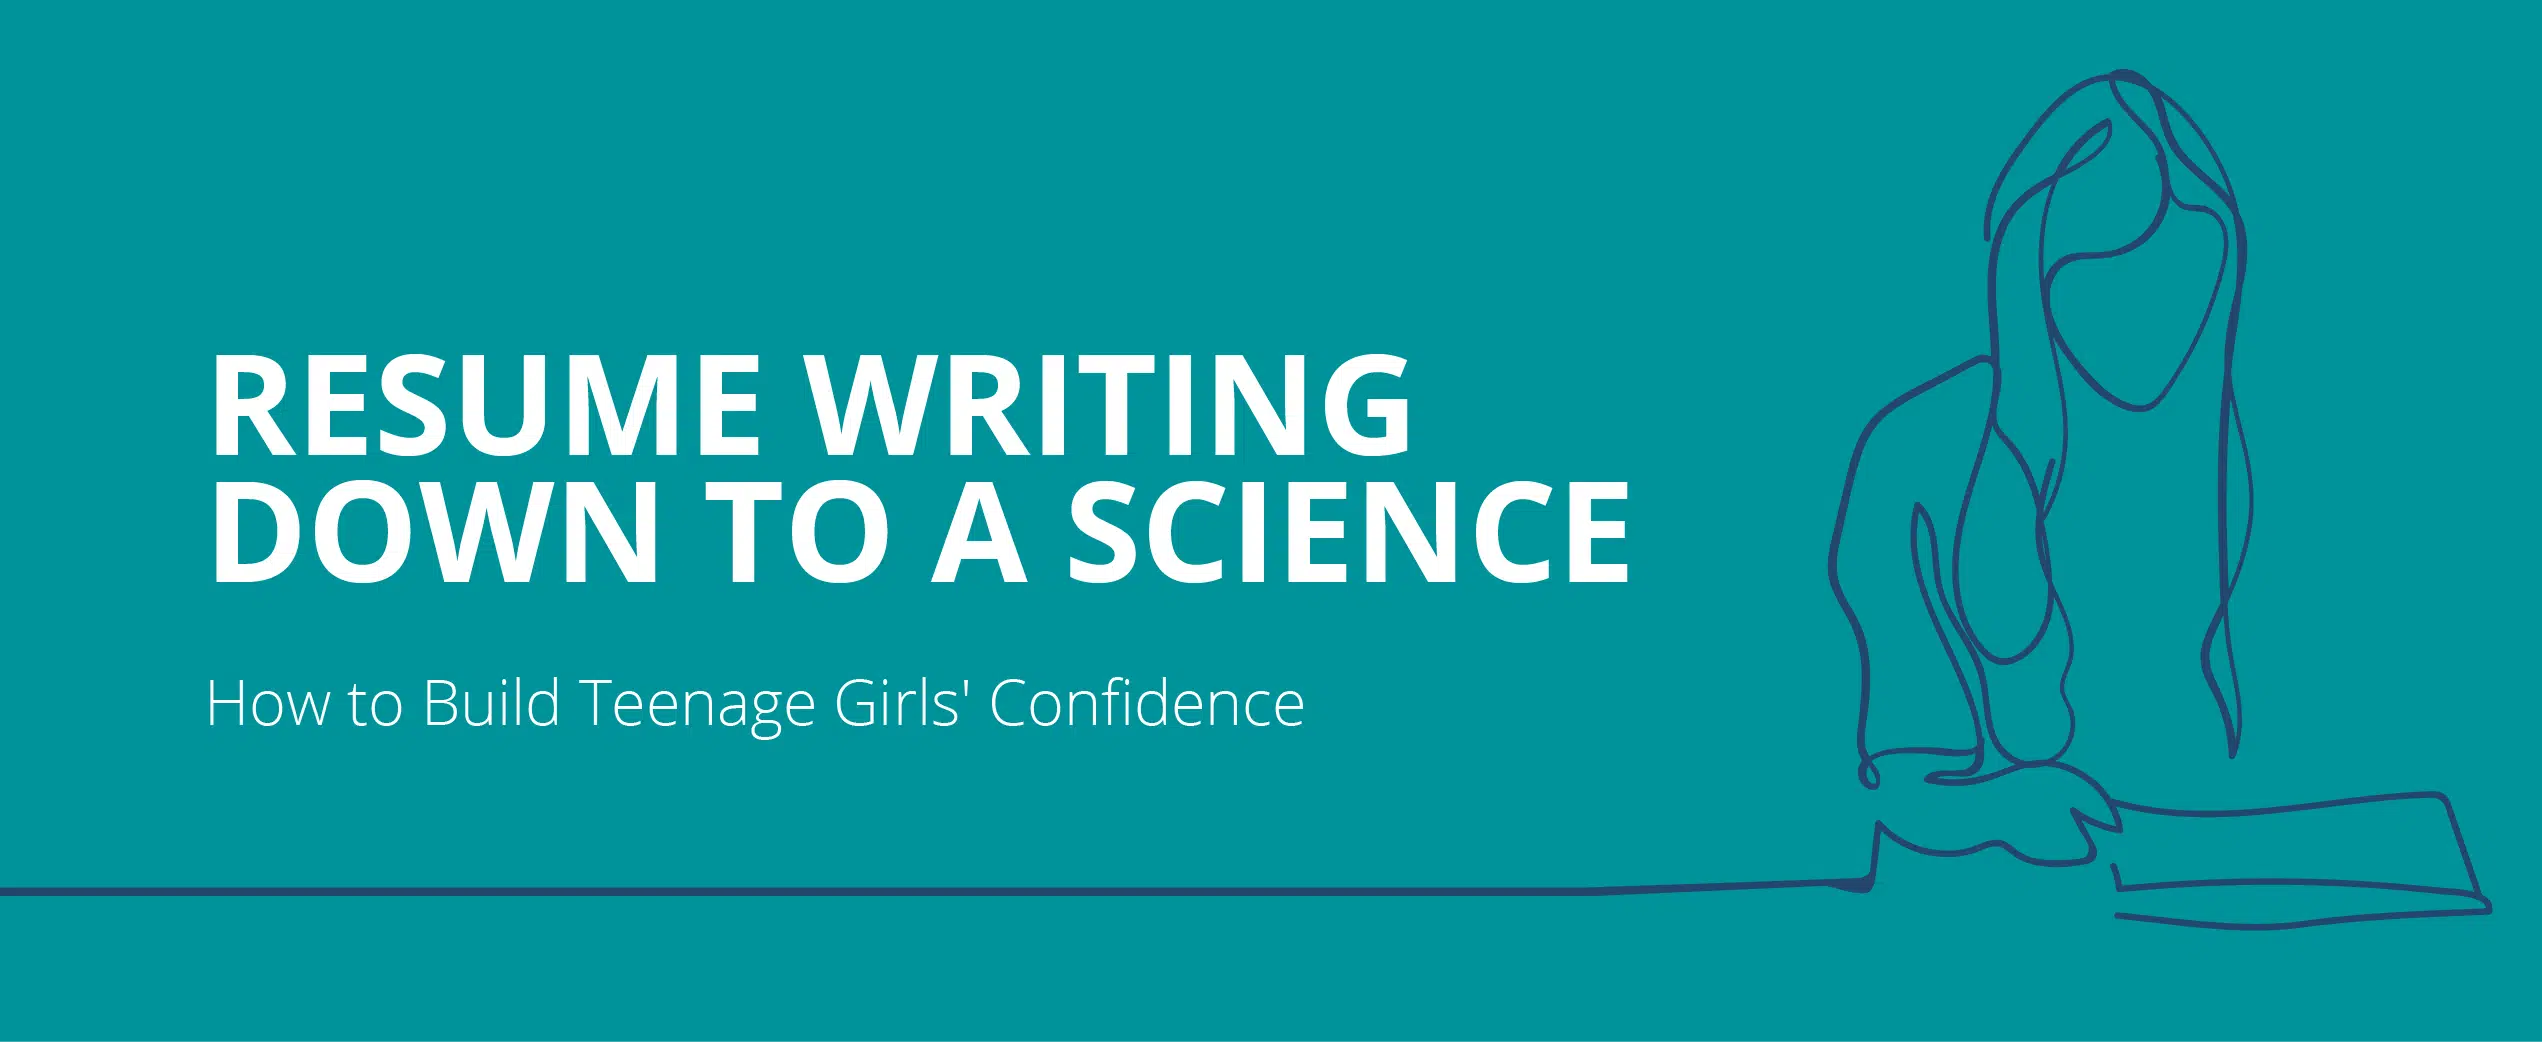 Resume Writing Down to a Science: How to Build Teenage Girls’ Confidence